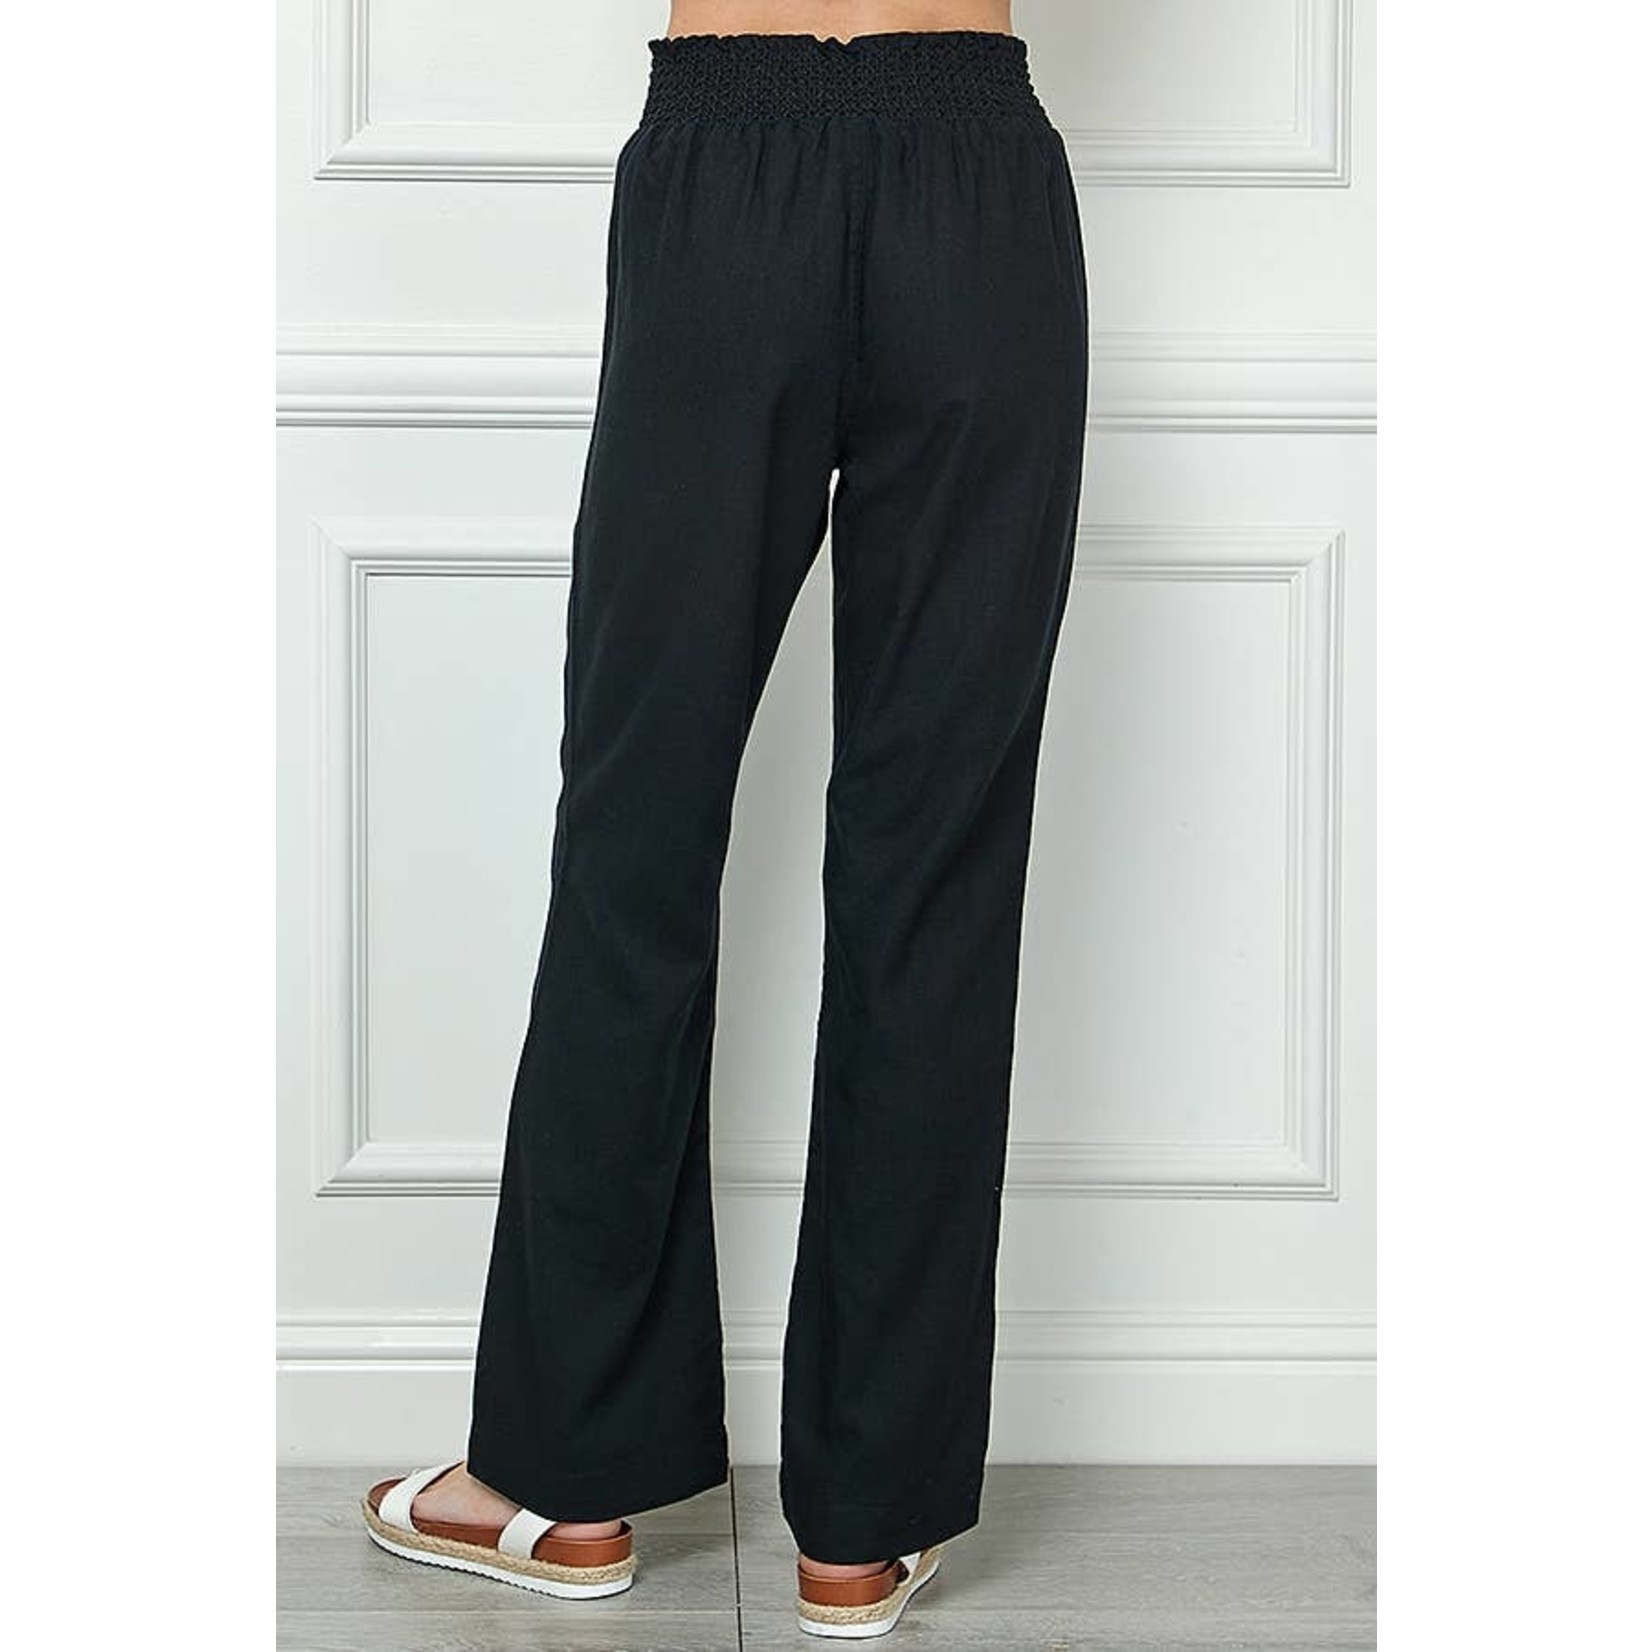 Wide Cut Pull On Linen Pants with Elastic Waistband